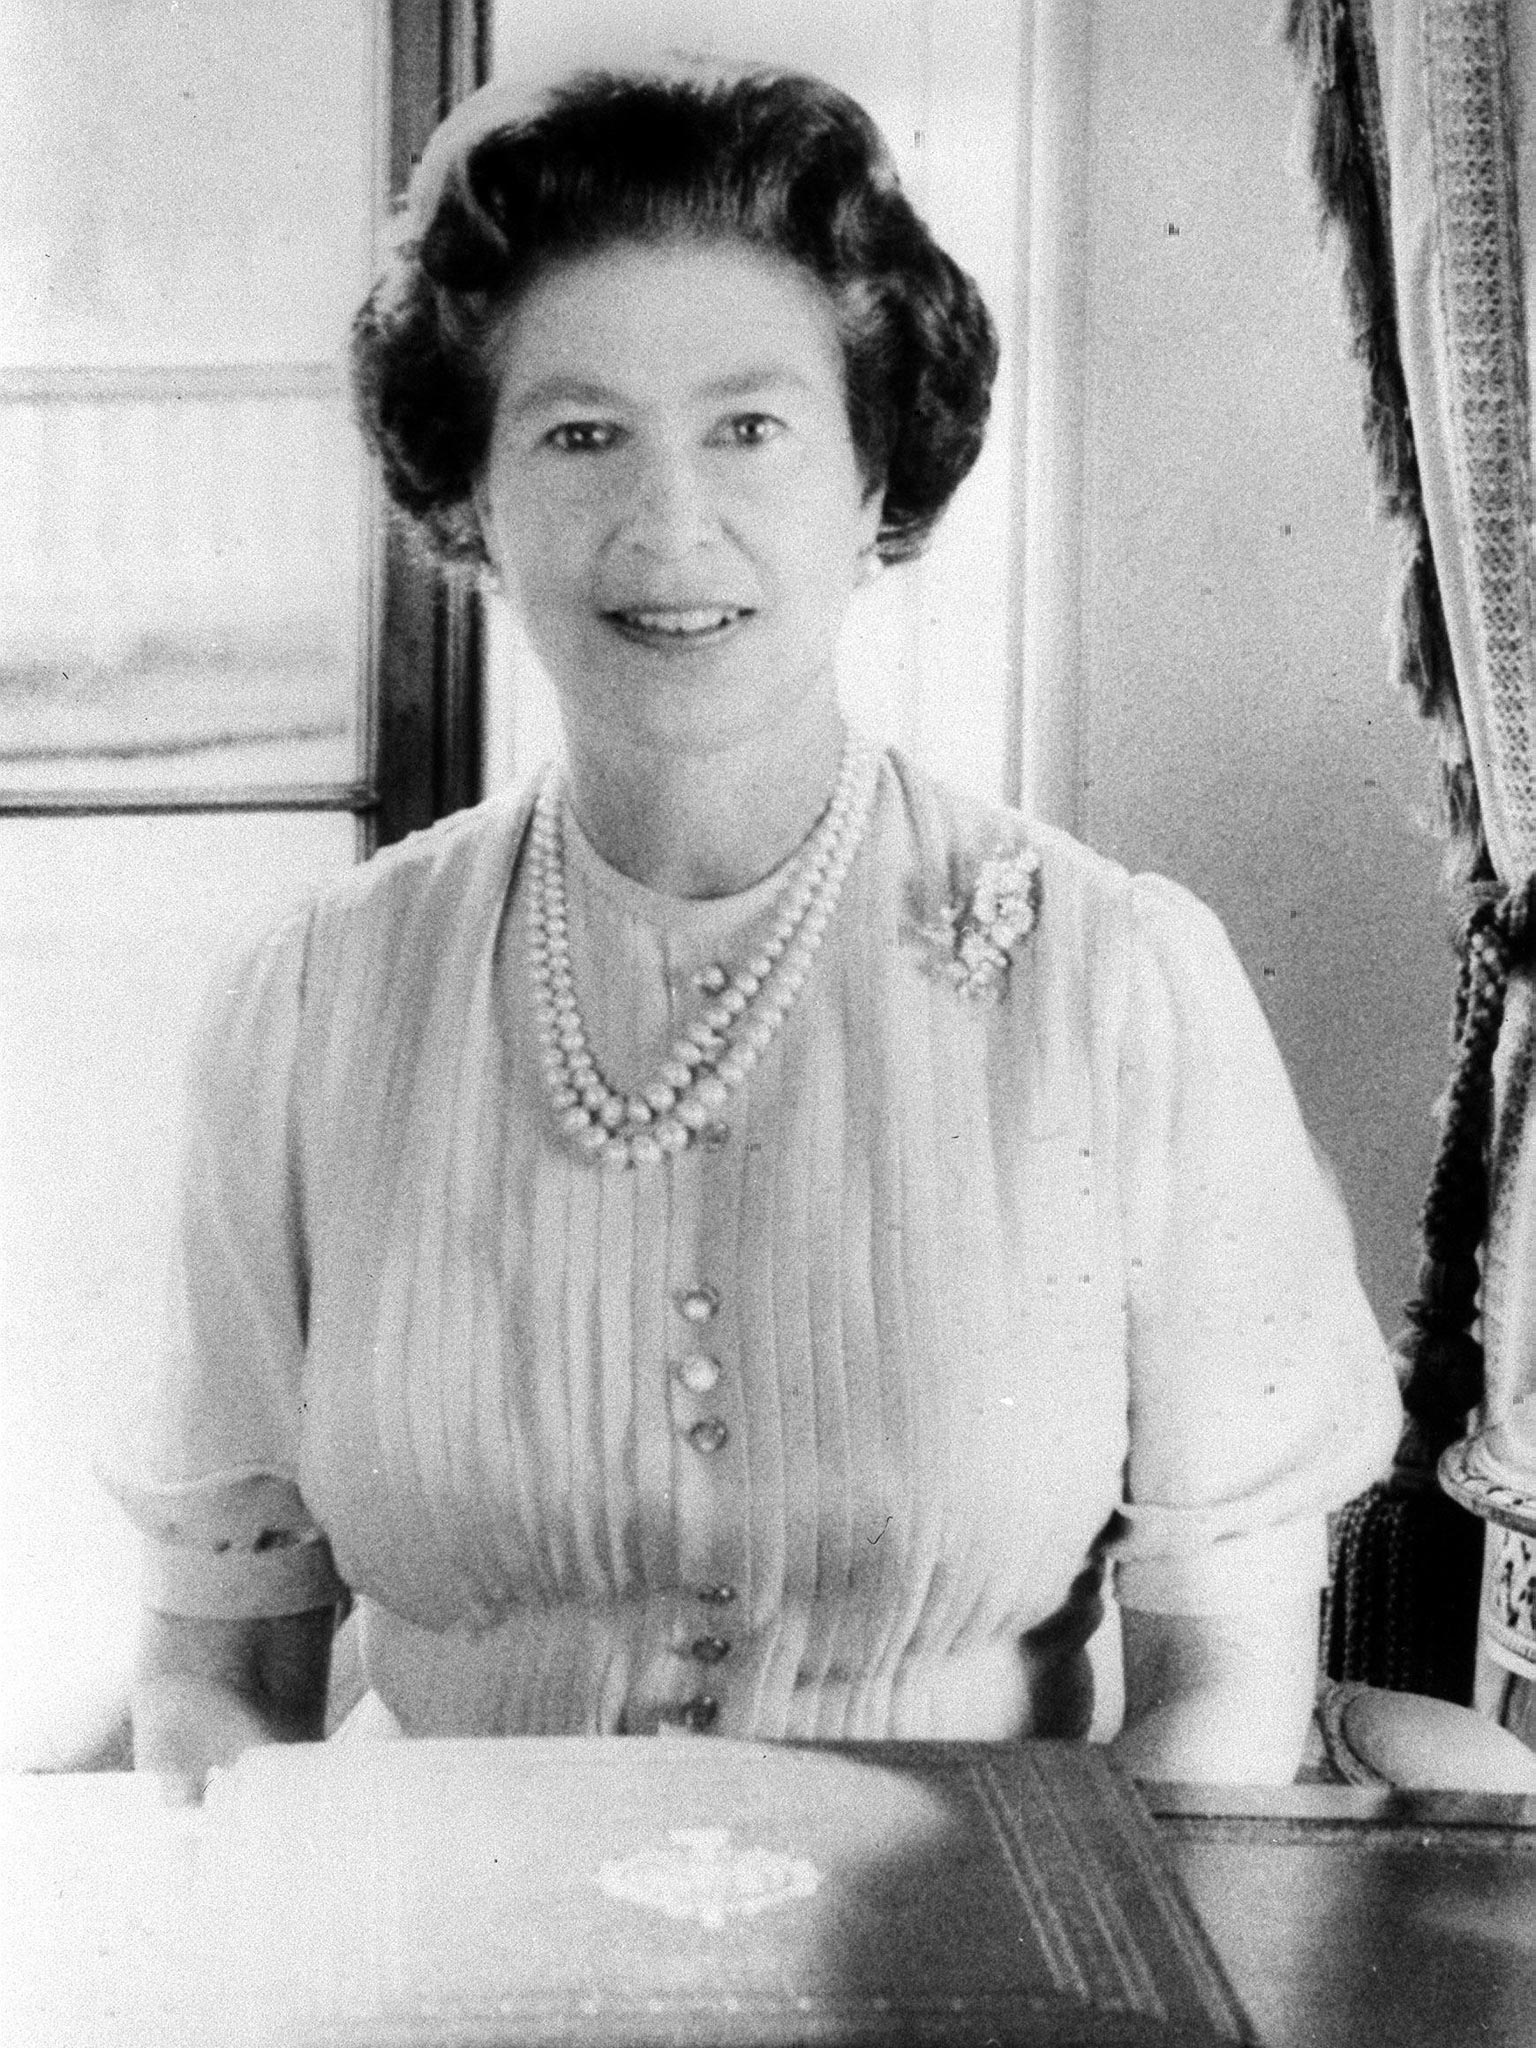 Queen Elizabeth II giving her Christmas Day Broadcast to the Commonwealth.